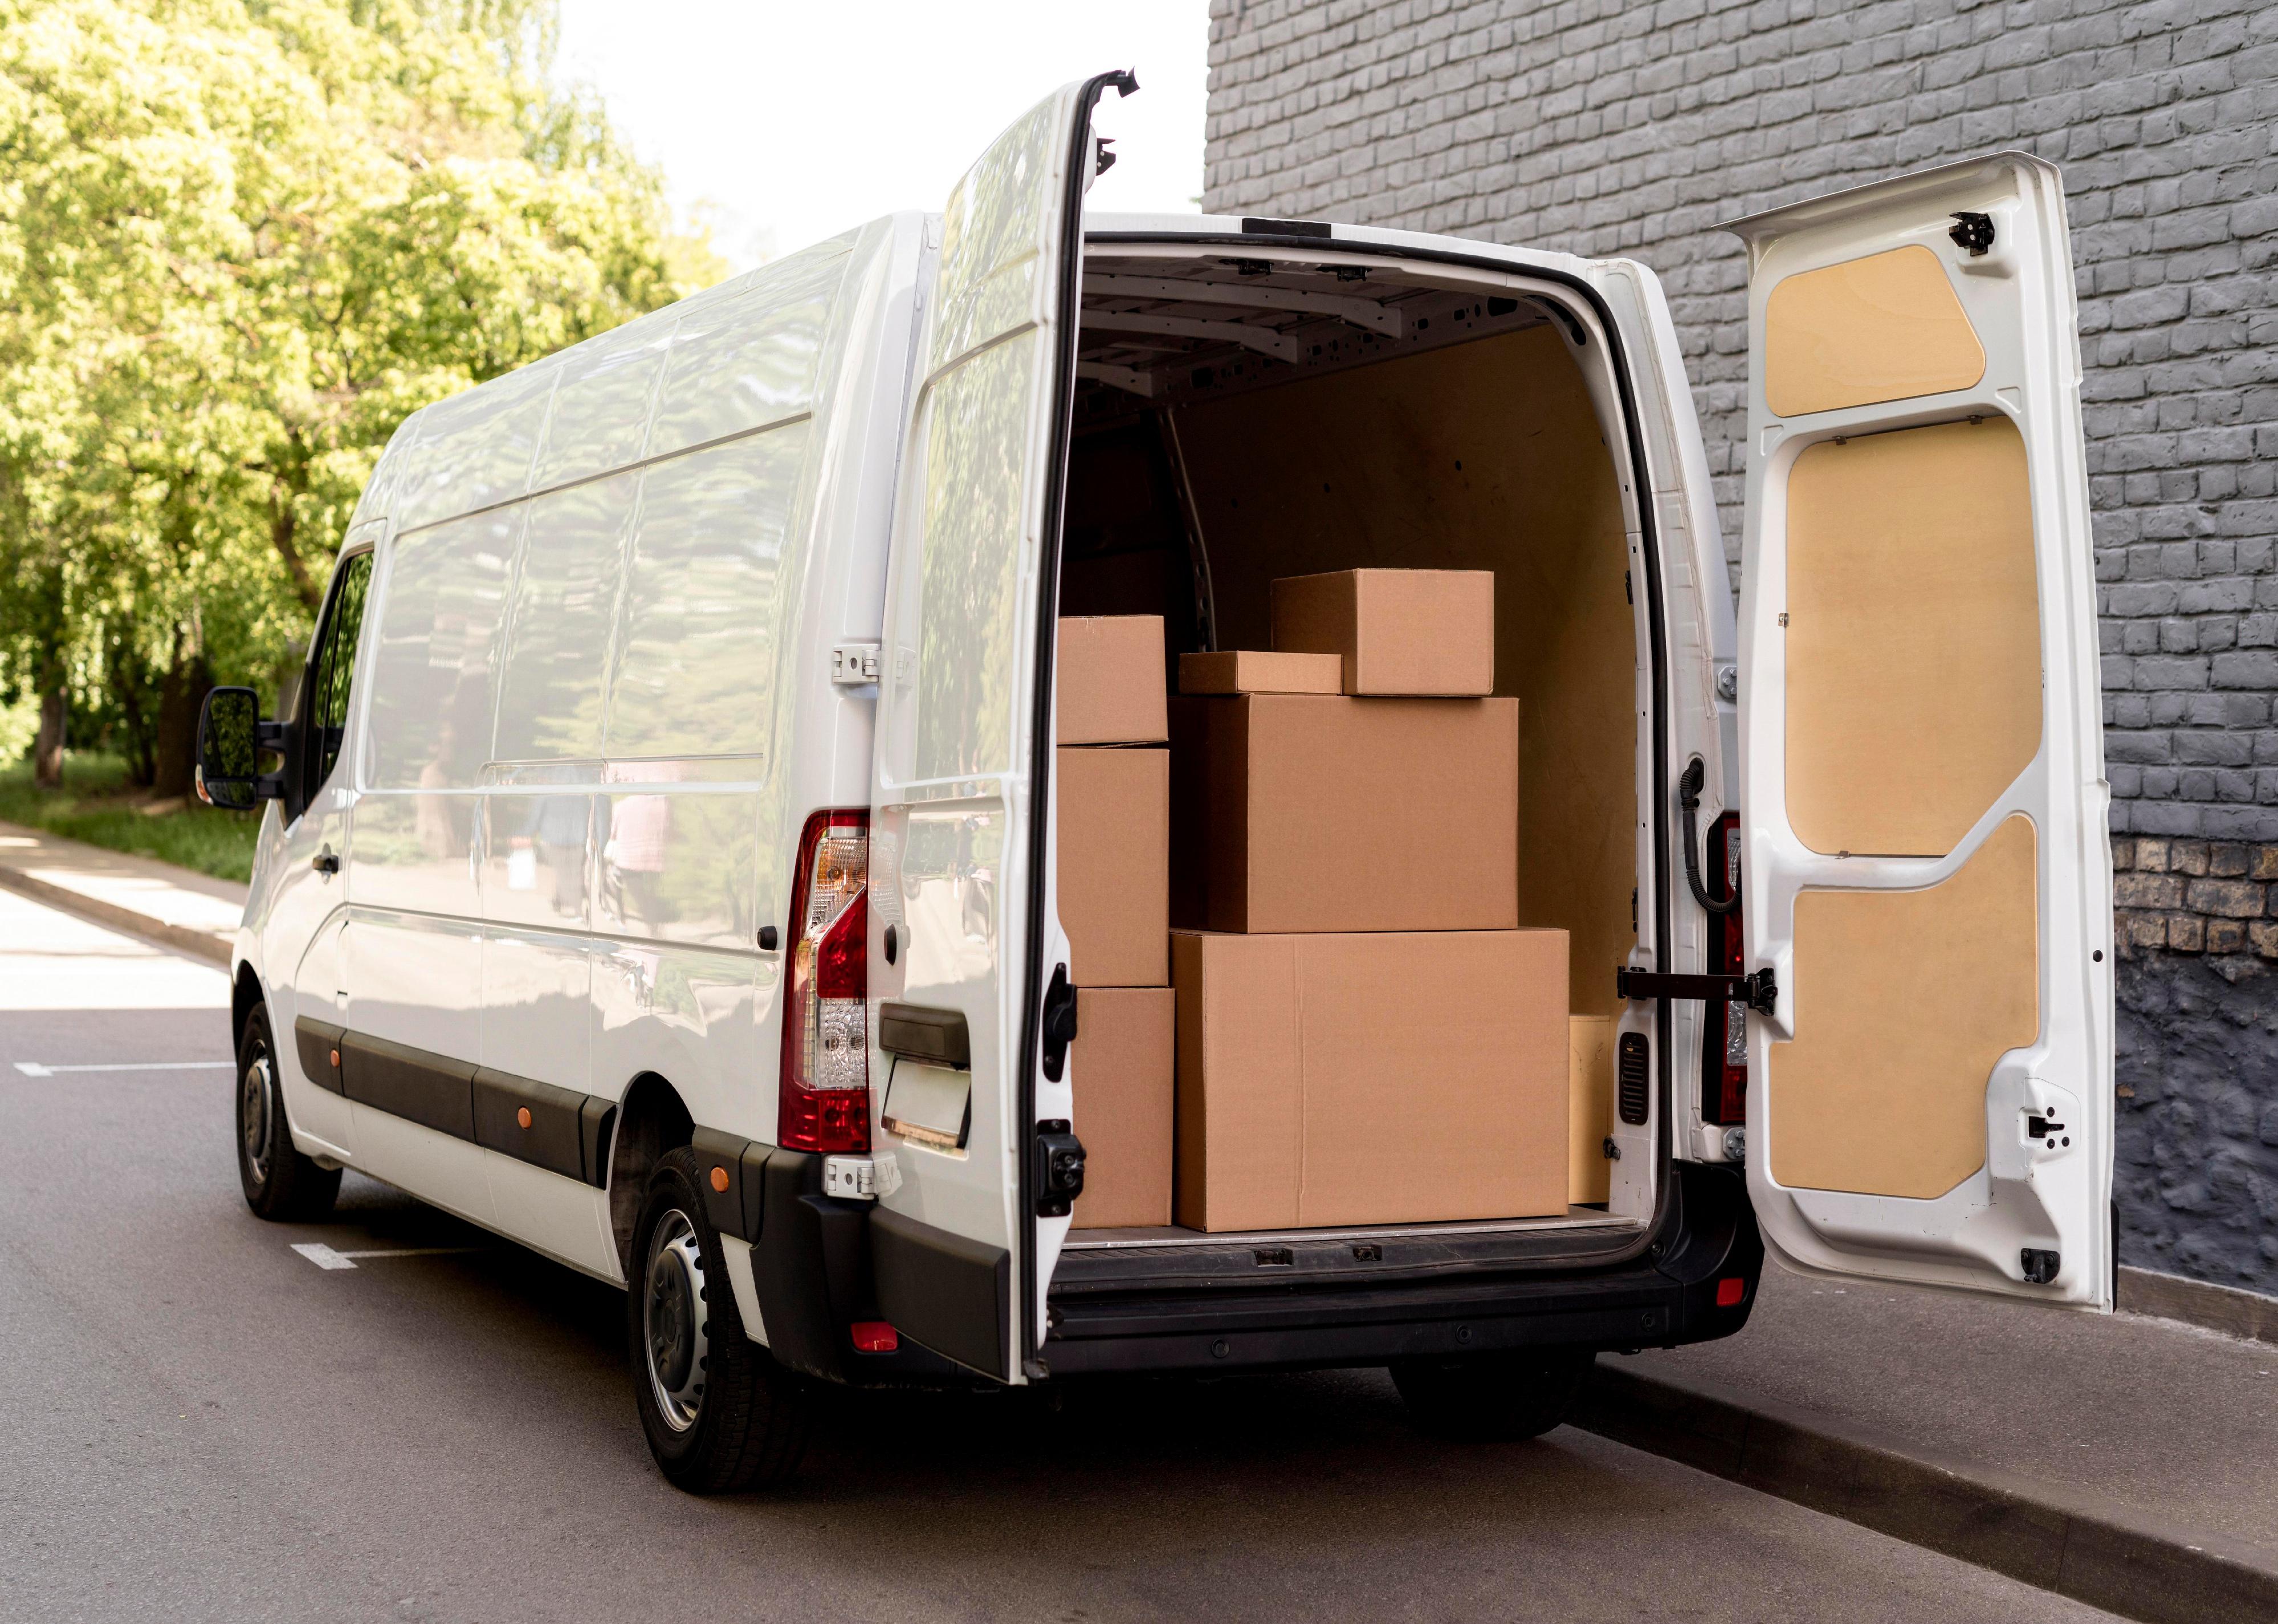 White van with its back doors open, showing the back full of cardboard boxes.